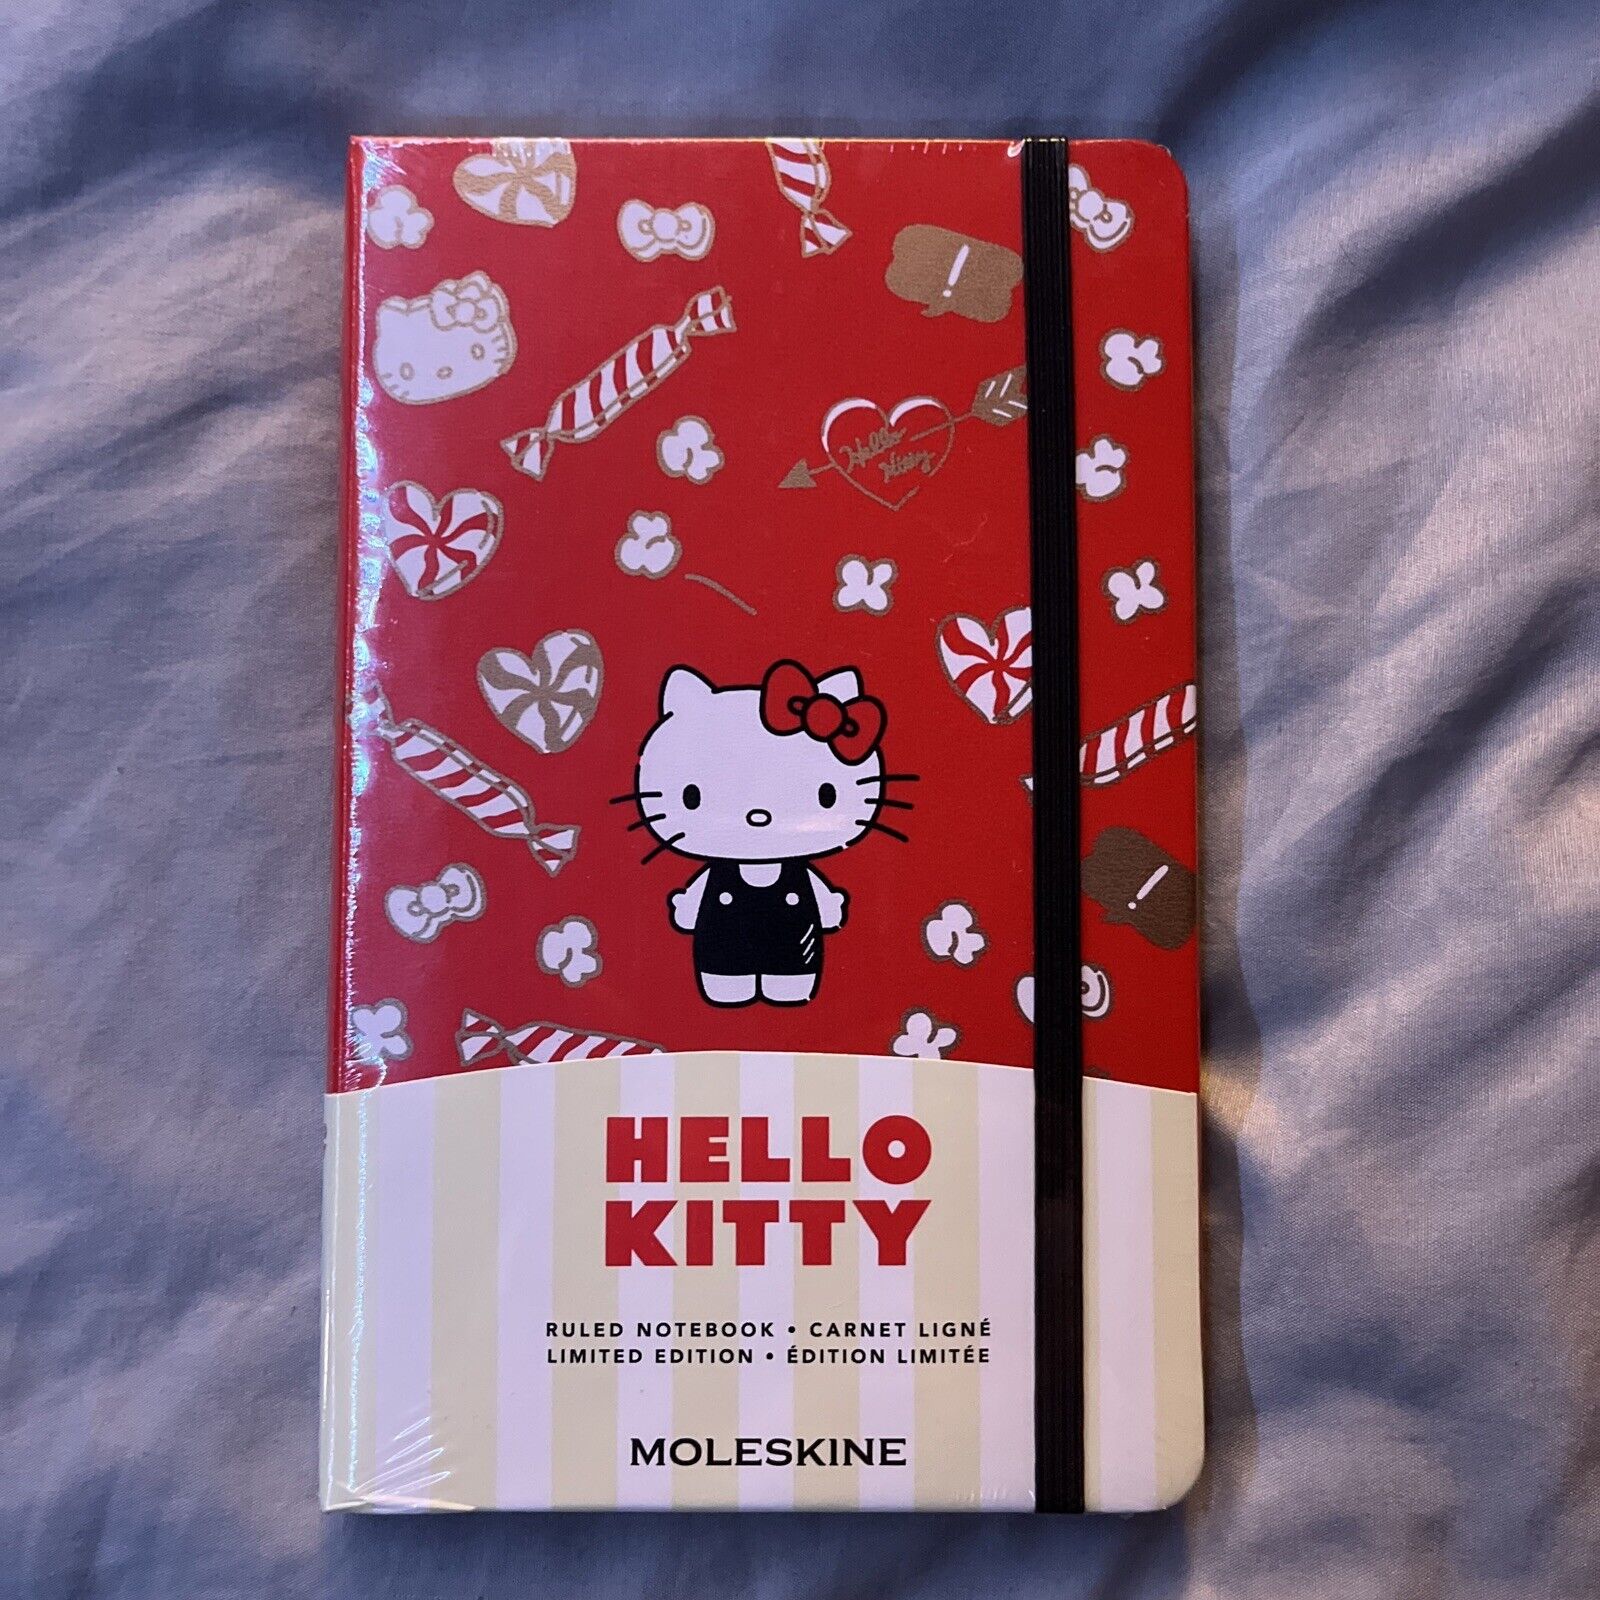 MOLESKINE Limited Edition Hello Kitty Notebook, Red, Ruled, Hard Cover 